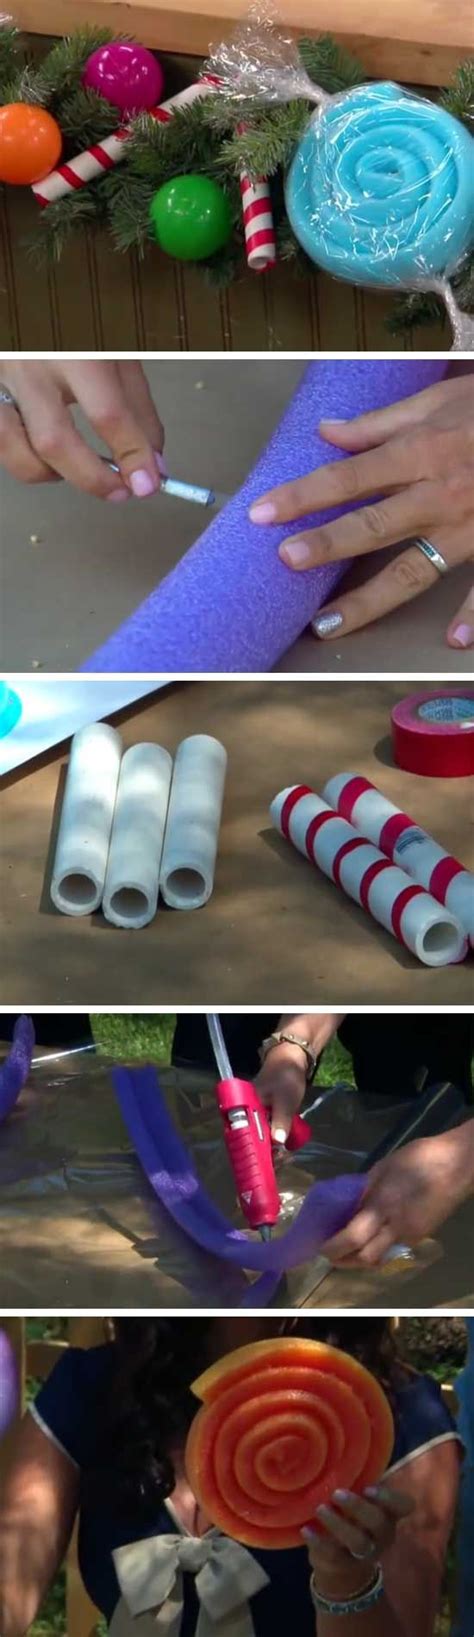 How To Make A Candy Garland For Christmas With Pool Noodles Pvc Pies